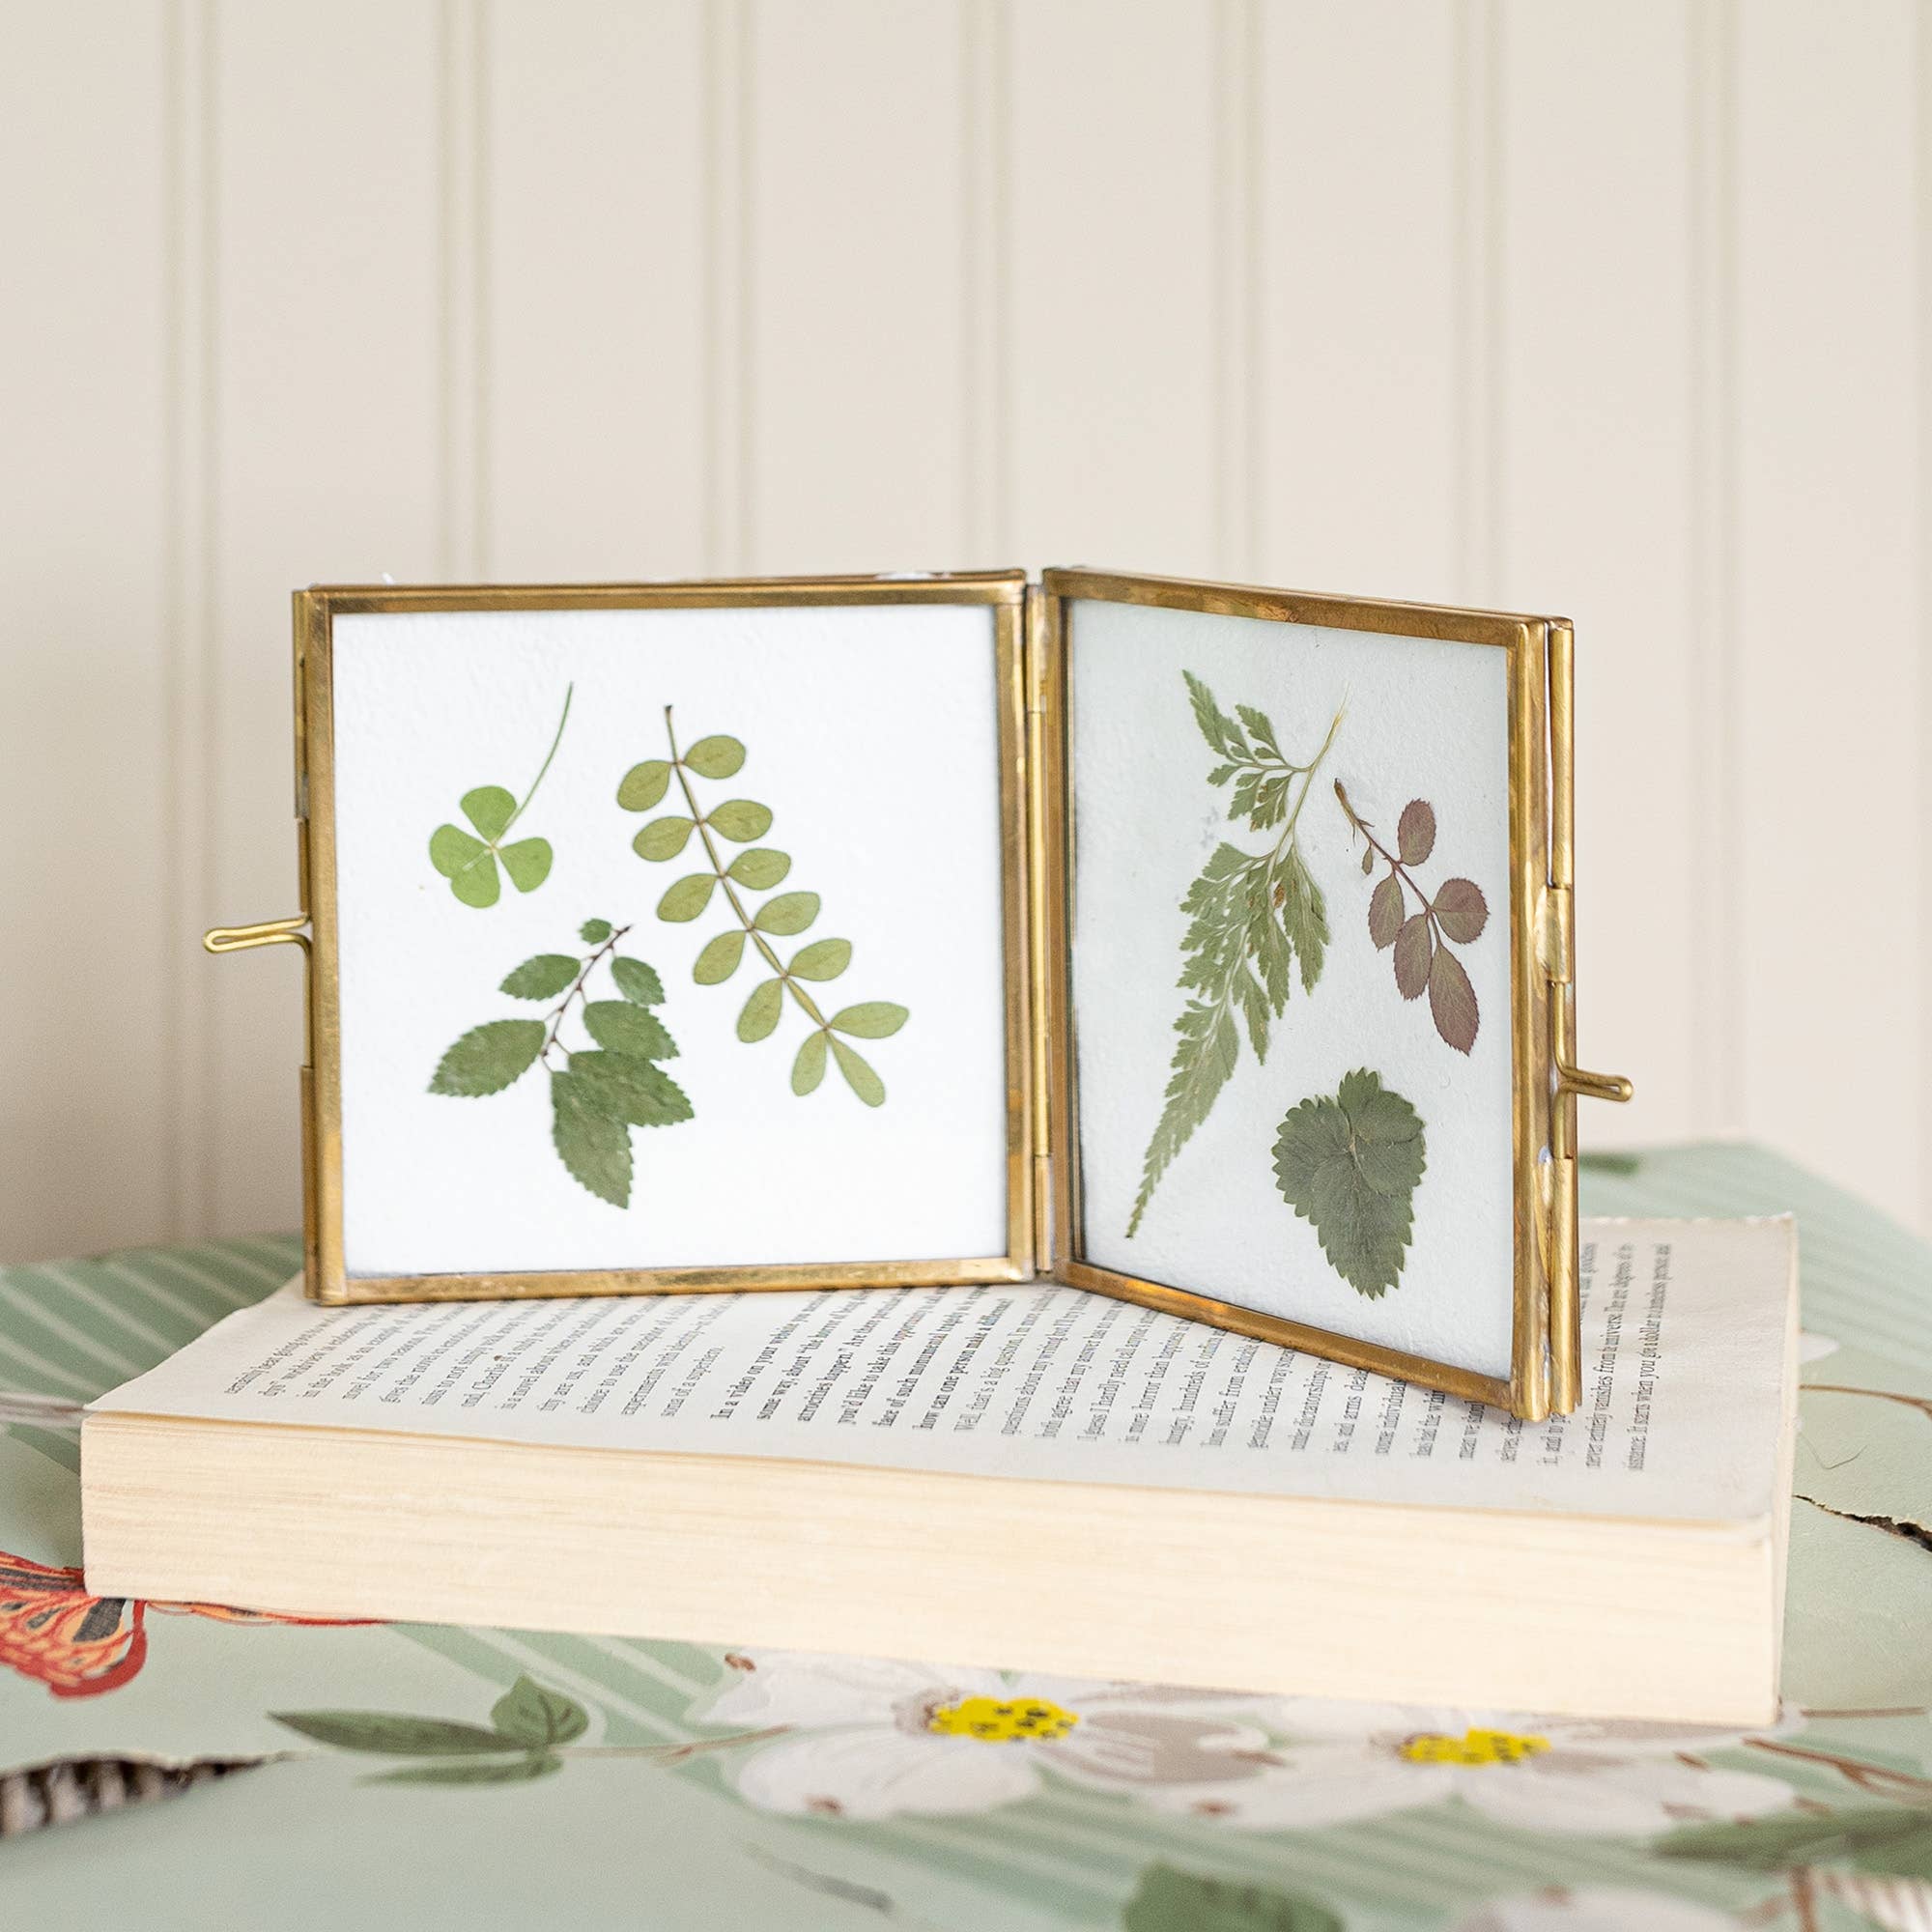 4X6 Hammered Brass Photo Frame Frames by Foreside Home and Garden